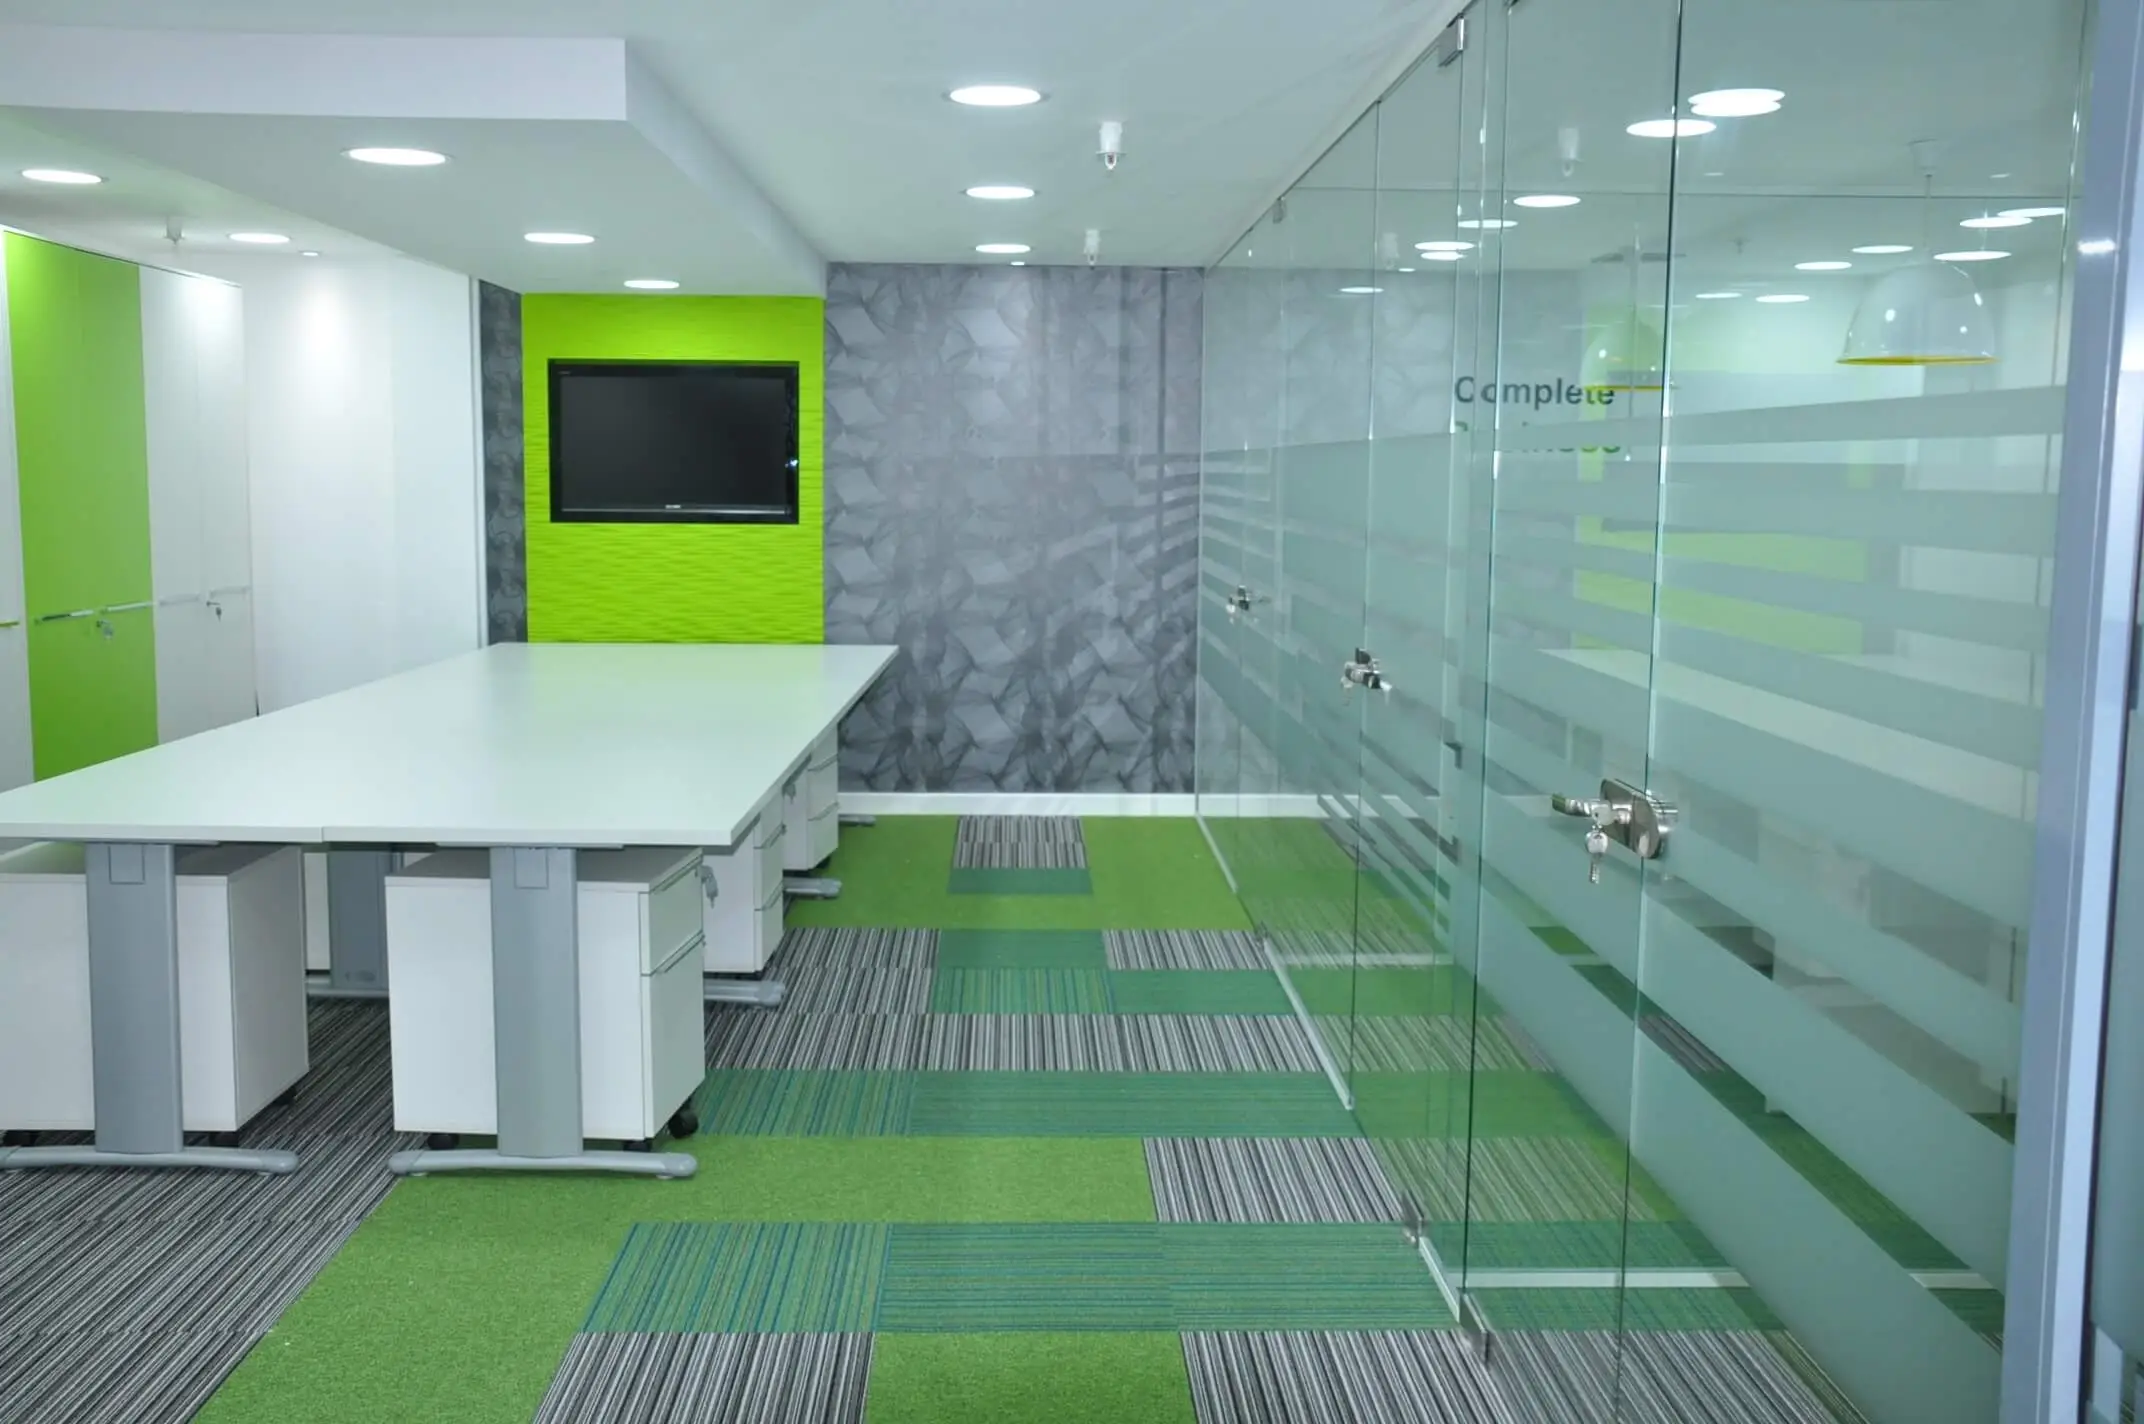 Designer flooring glass partitioning in office with desk pedestals and TV